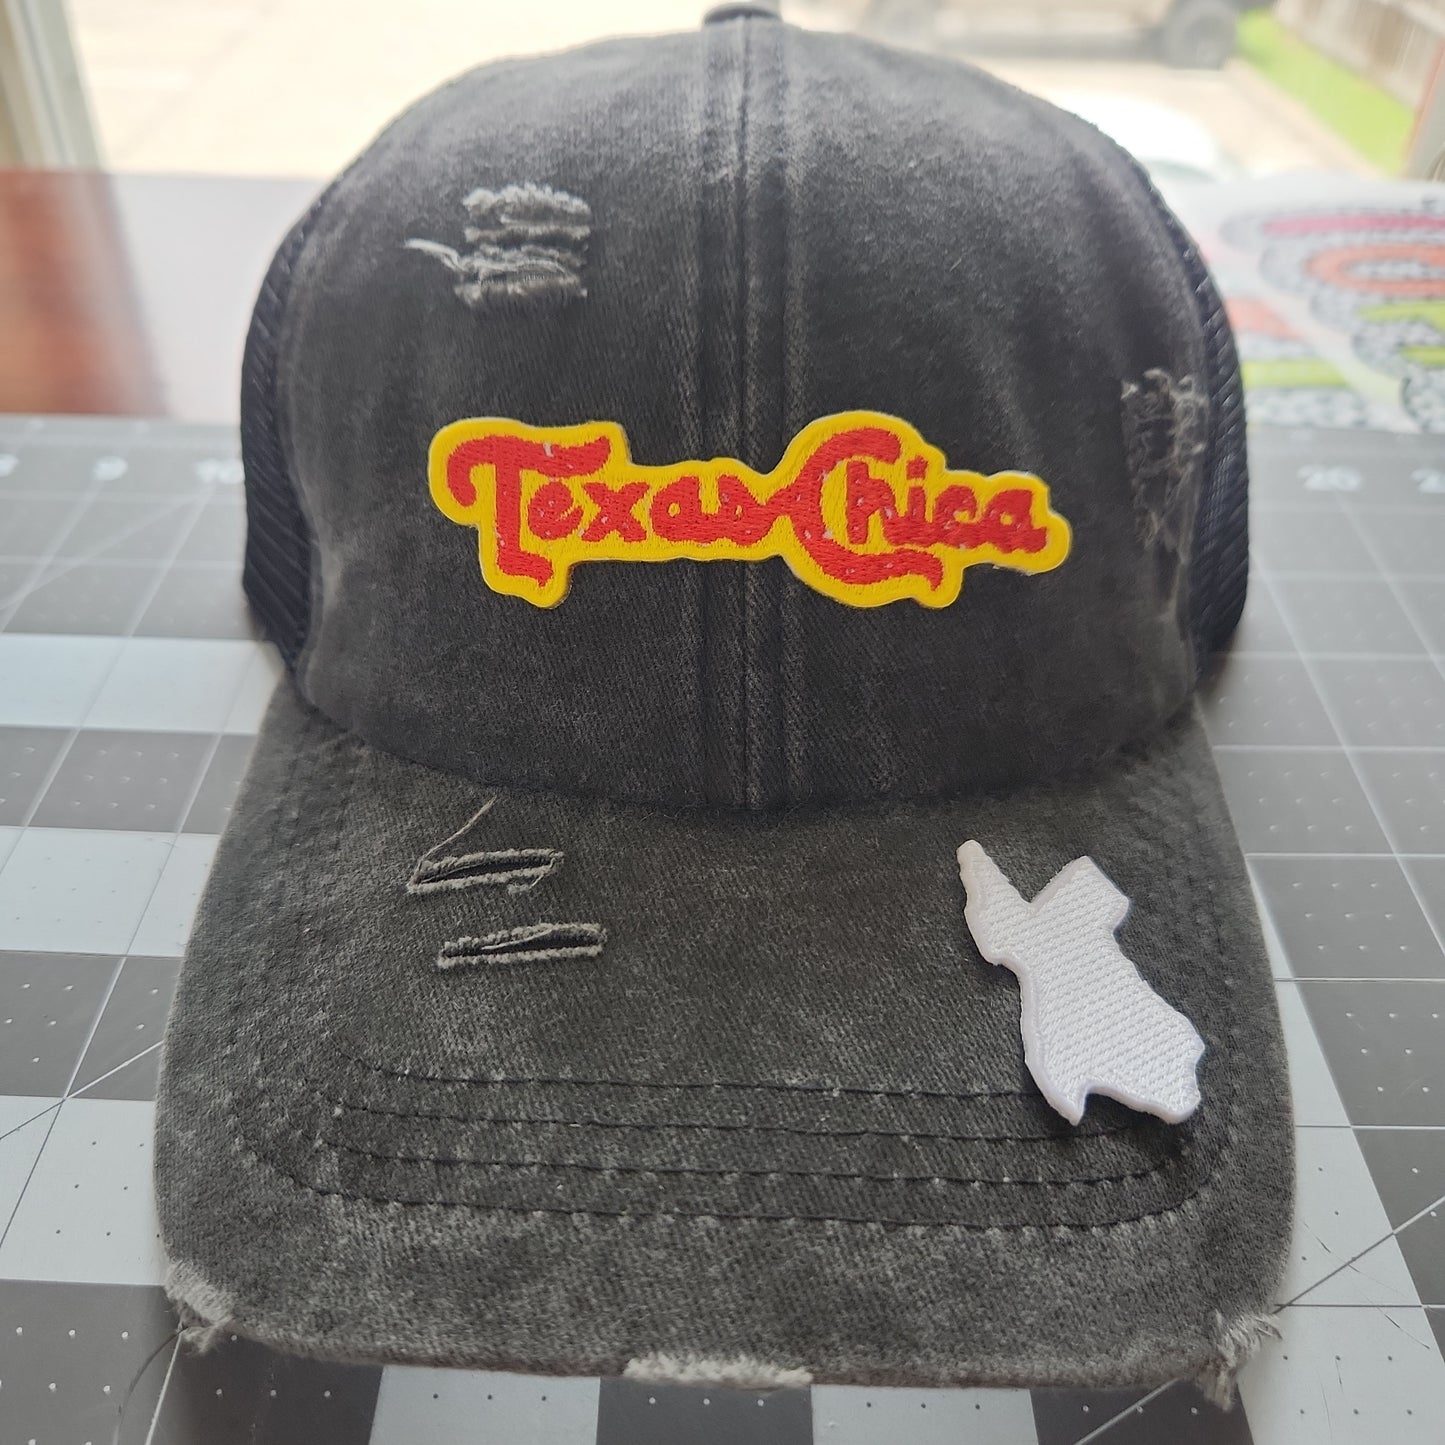 Texas Chica Iron-On PATCH